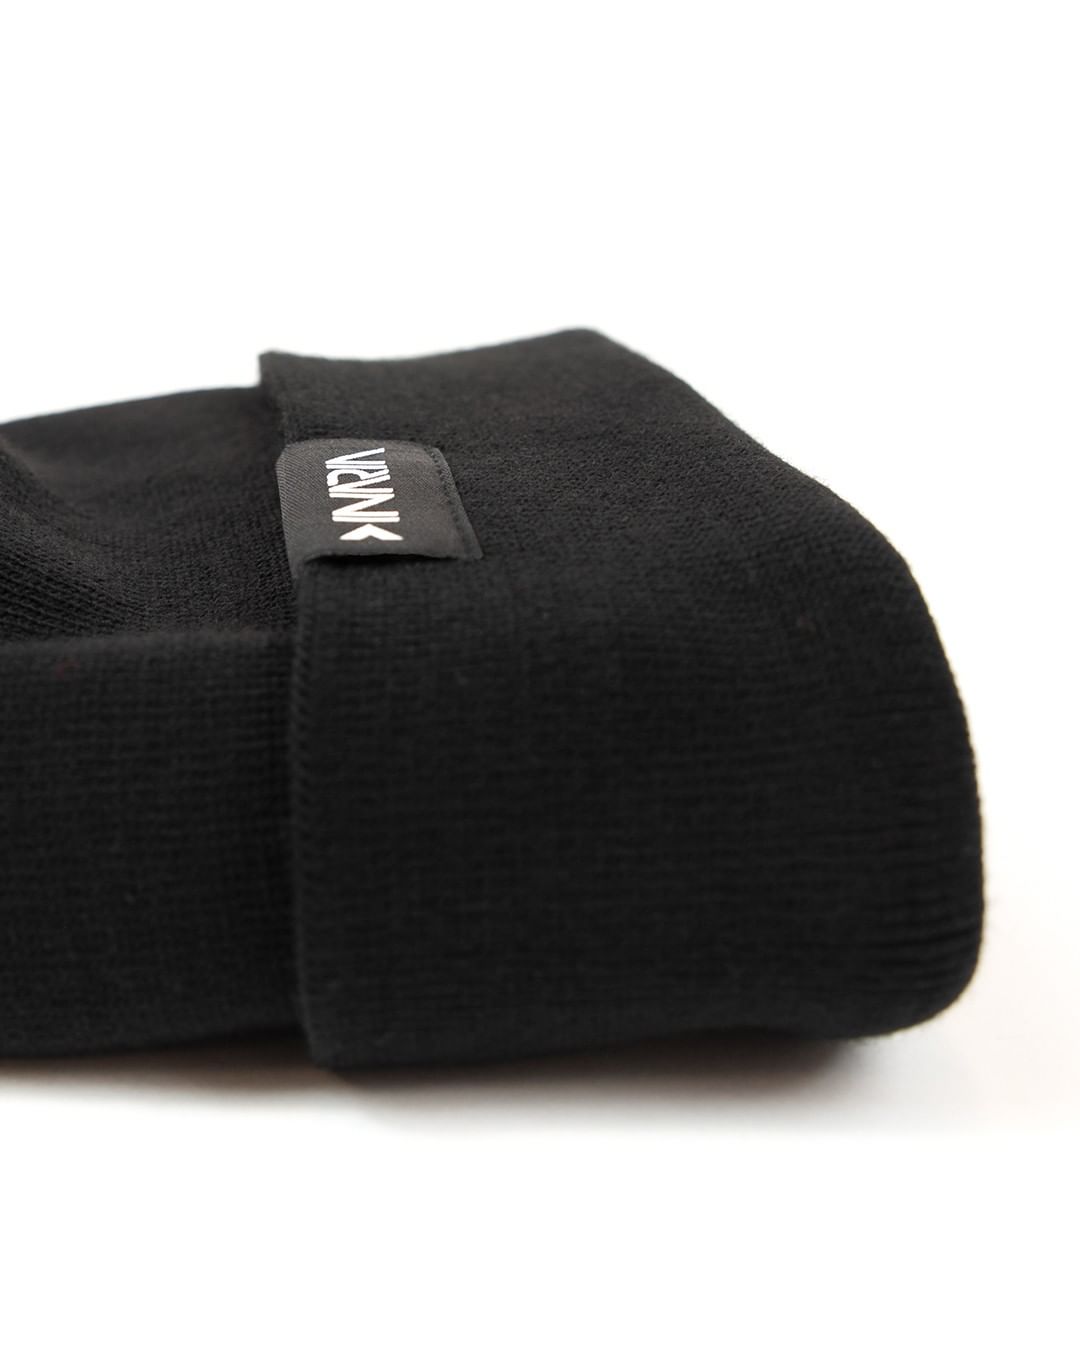 Staying cozy. Our branded beanies now available on all online club stores. #inariasoccer